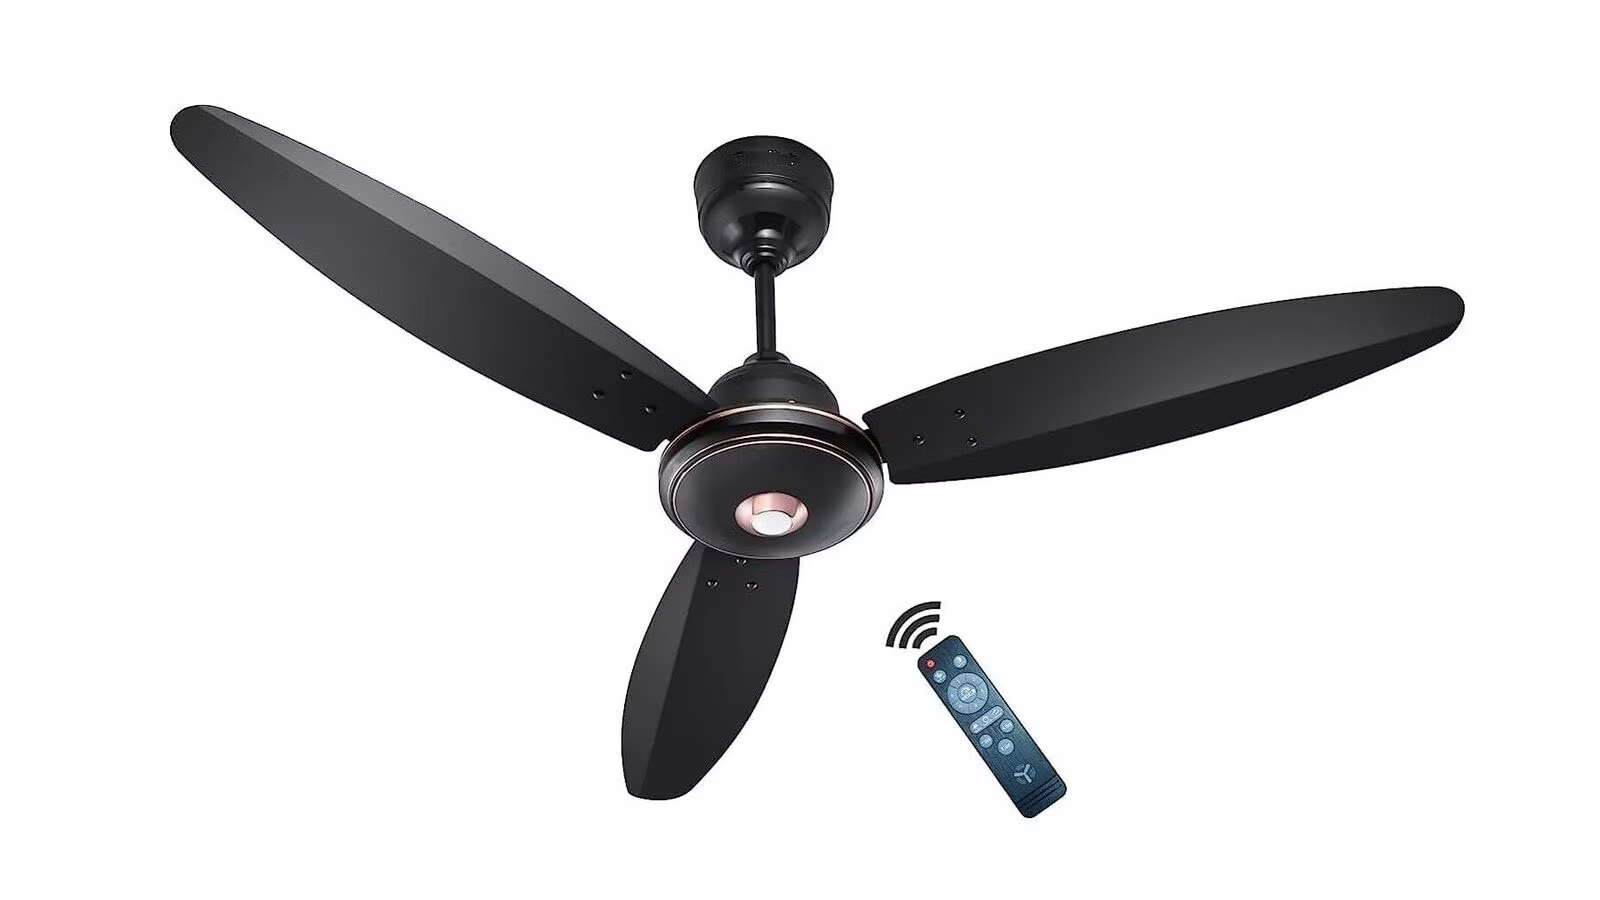 Enhancing Indoor Air Quality: How BLDC Ceiling Fans Contribute To A Healthier Home Environment